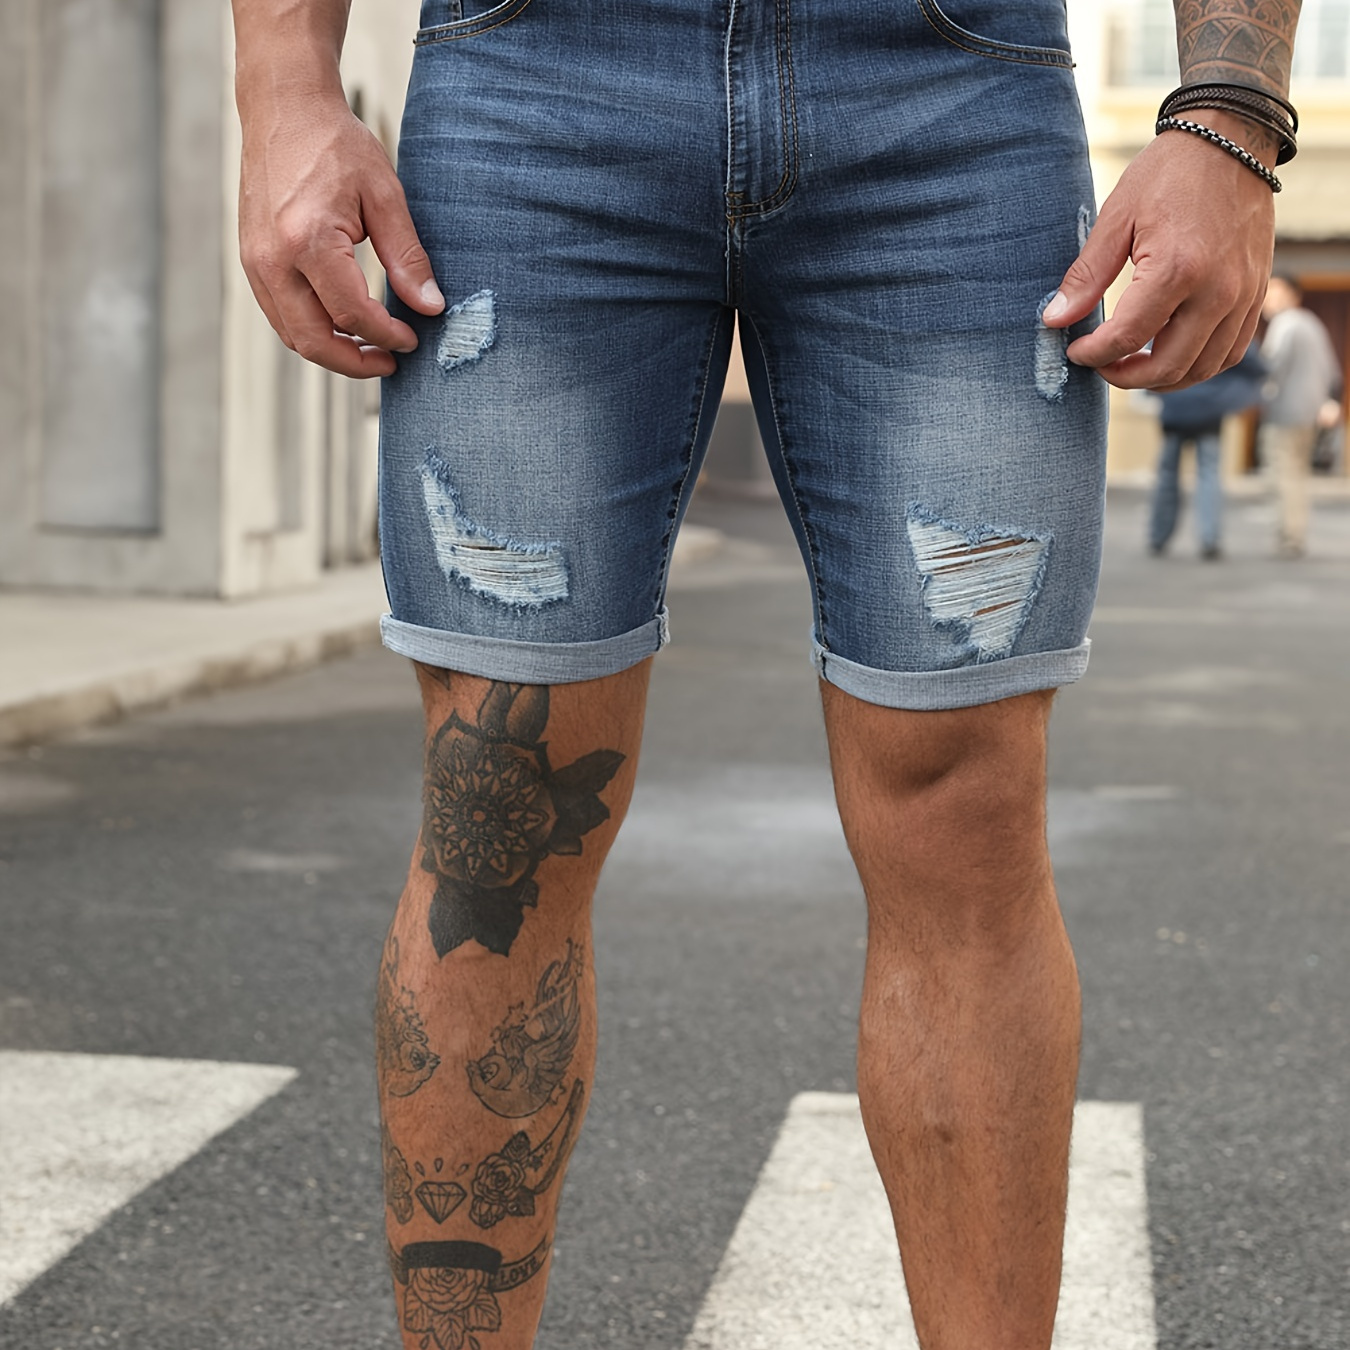 Frontwalk Mens Casual Ripped Jean Shorts Slim Fit Hole Short Pants